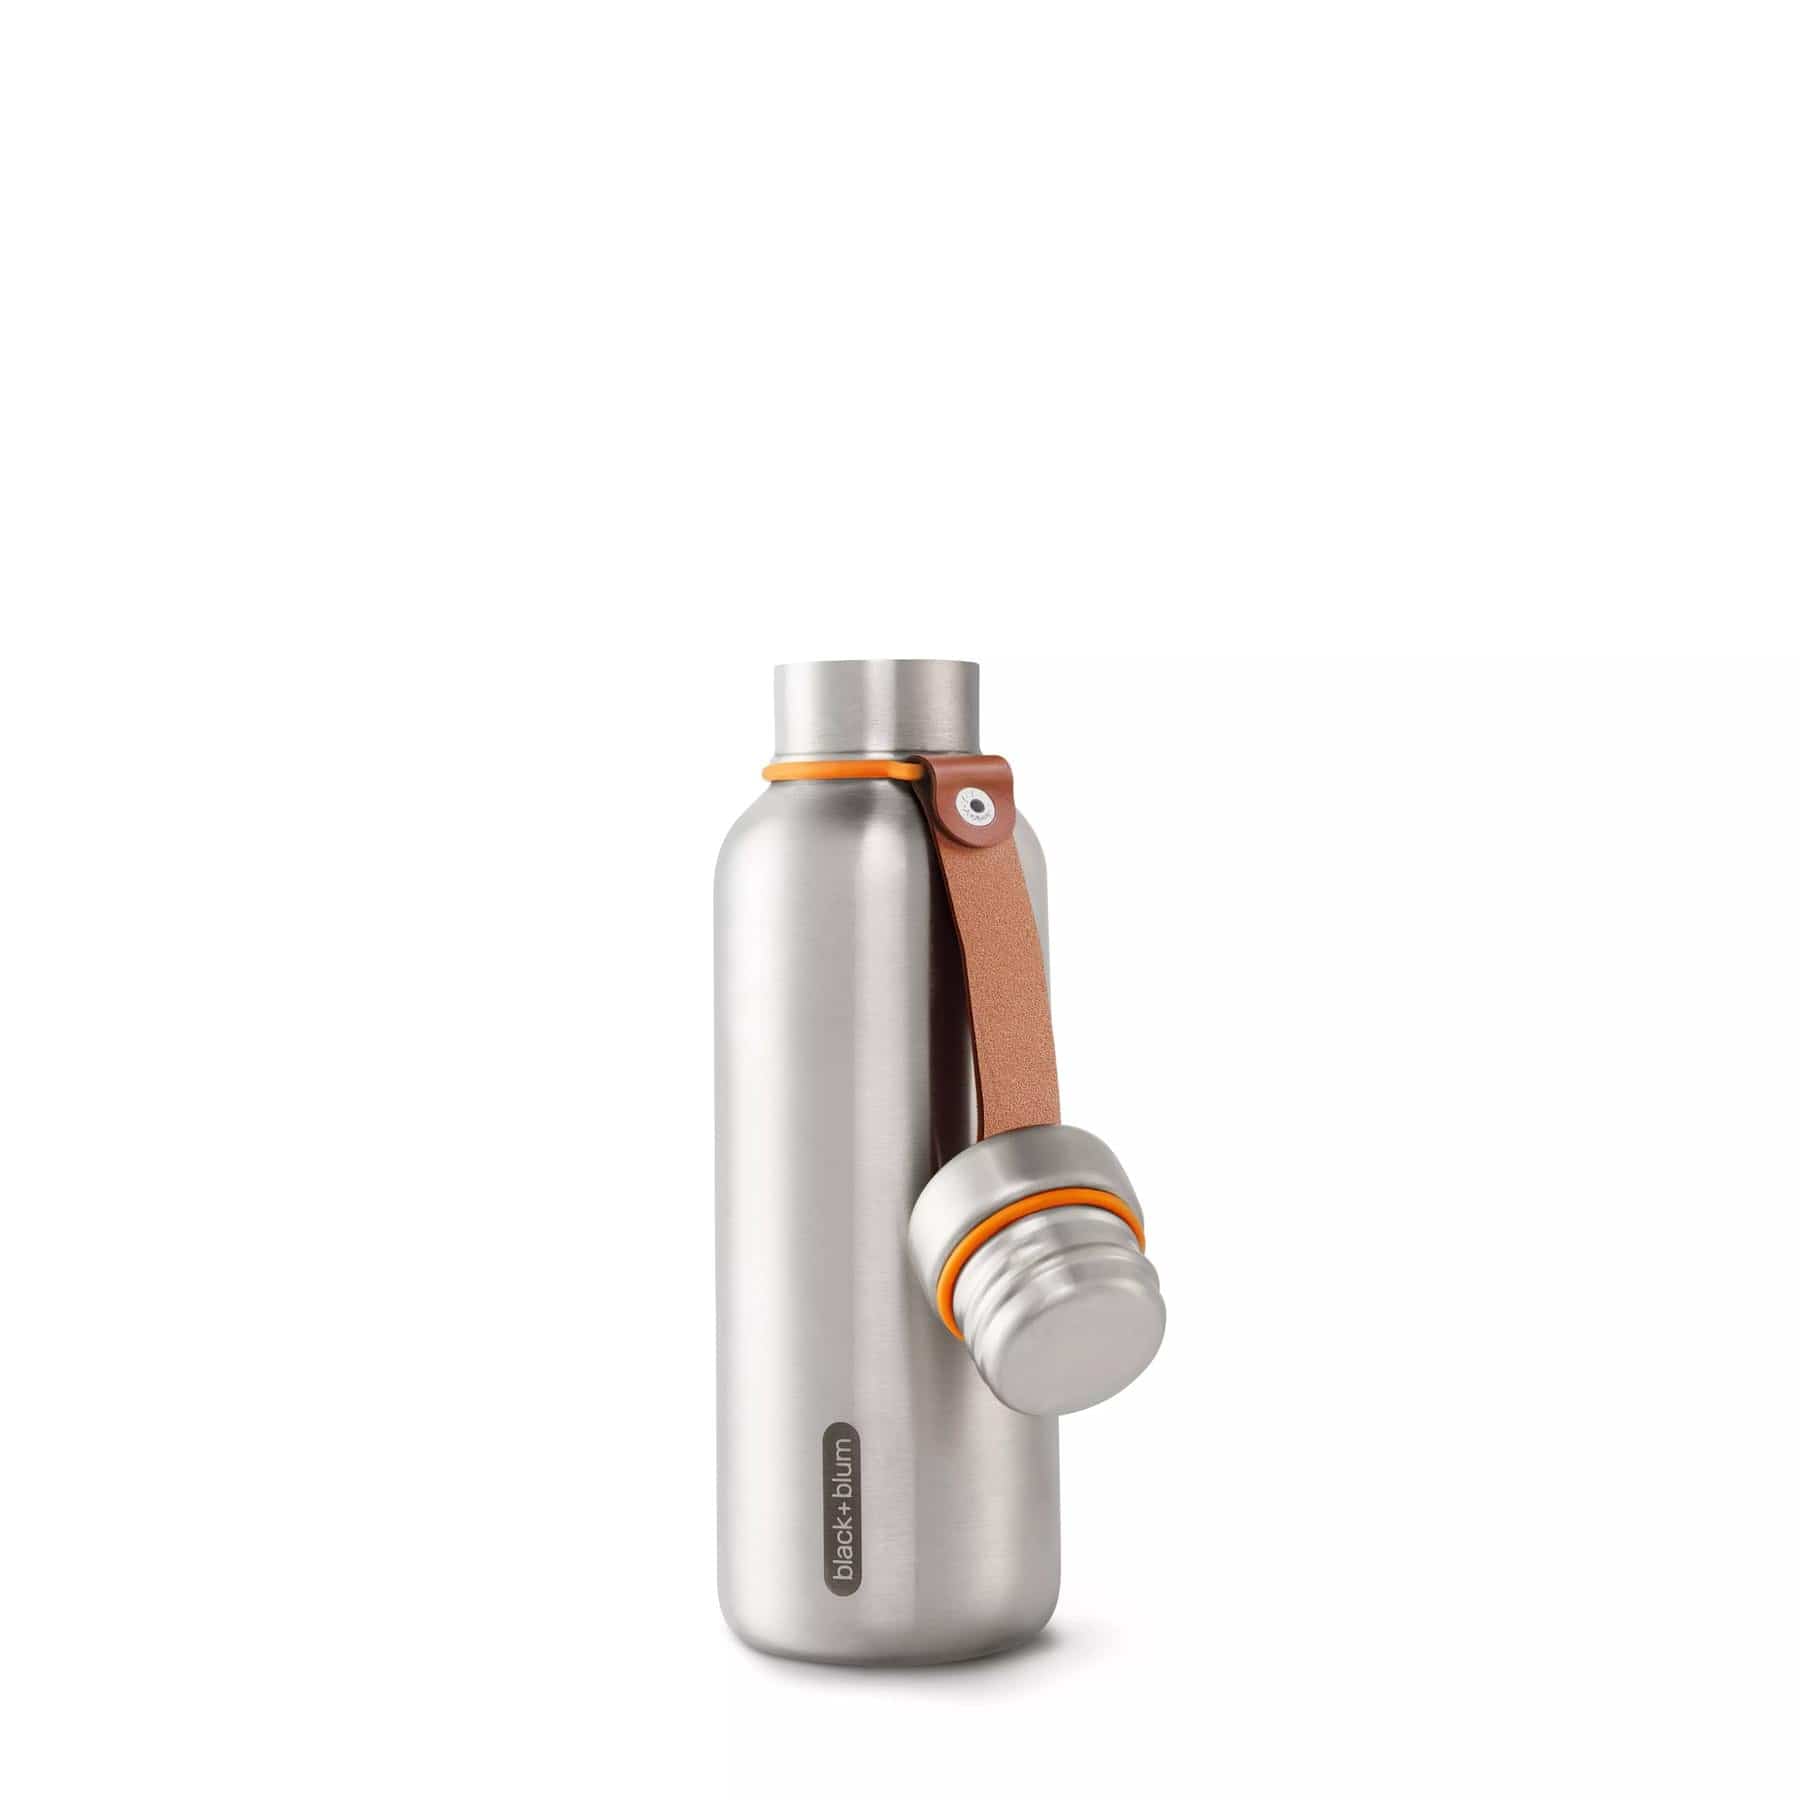 Insulated water bottle 500ml